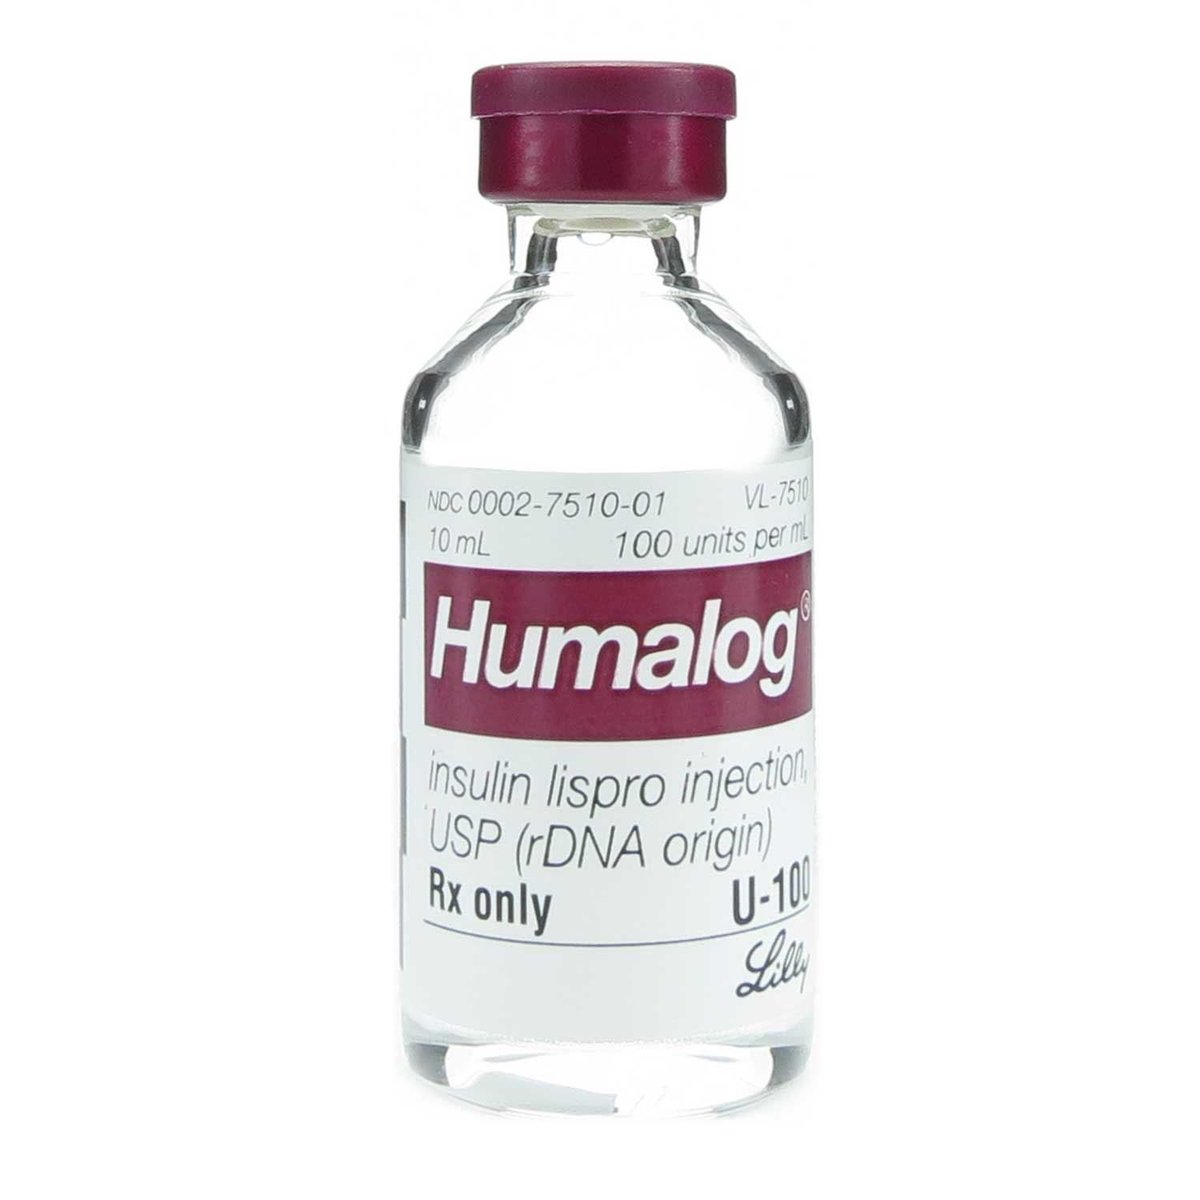 insulin as bottled water: a thread 1. humalog — kirkland signature tried and true, common in many a household, a bargain compared to other brands if you have a costco membership/participating formulary